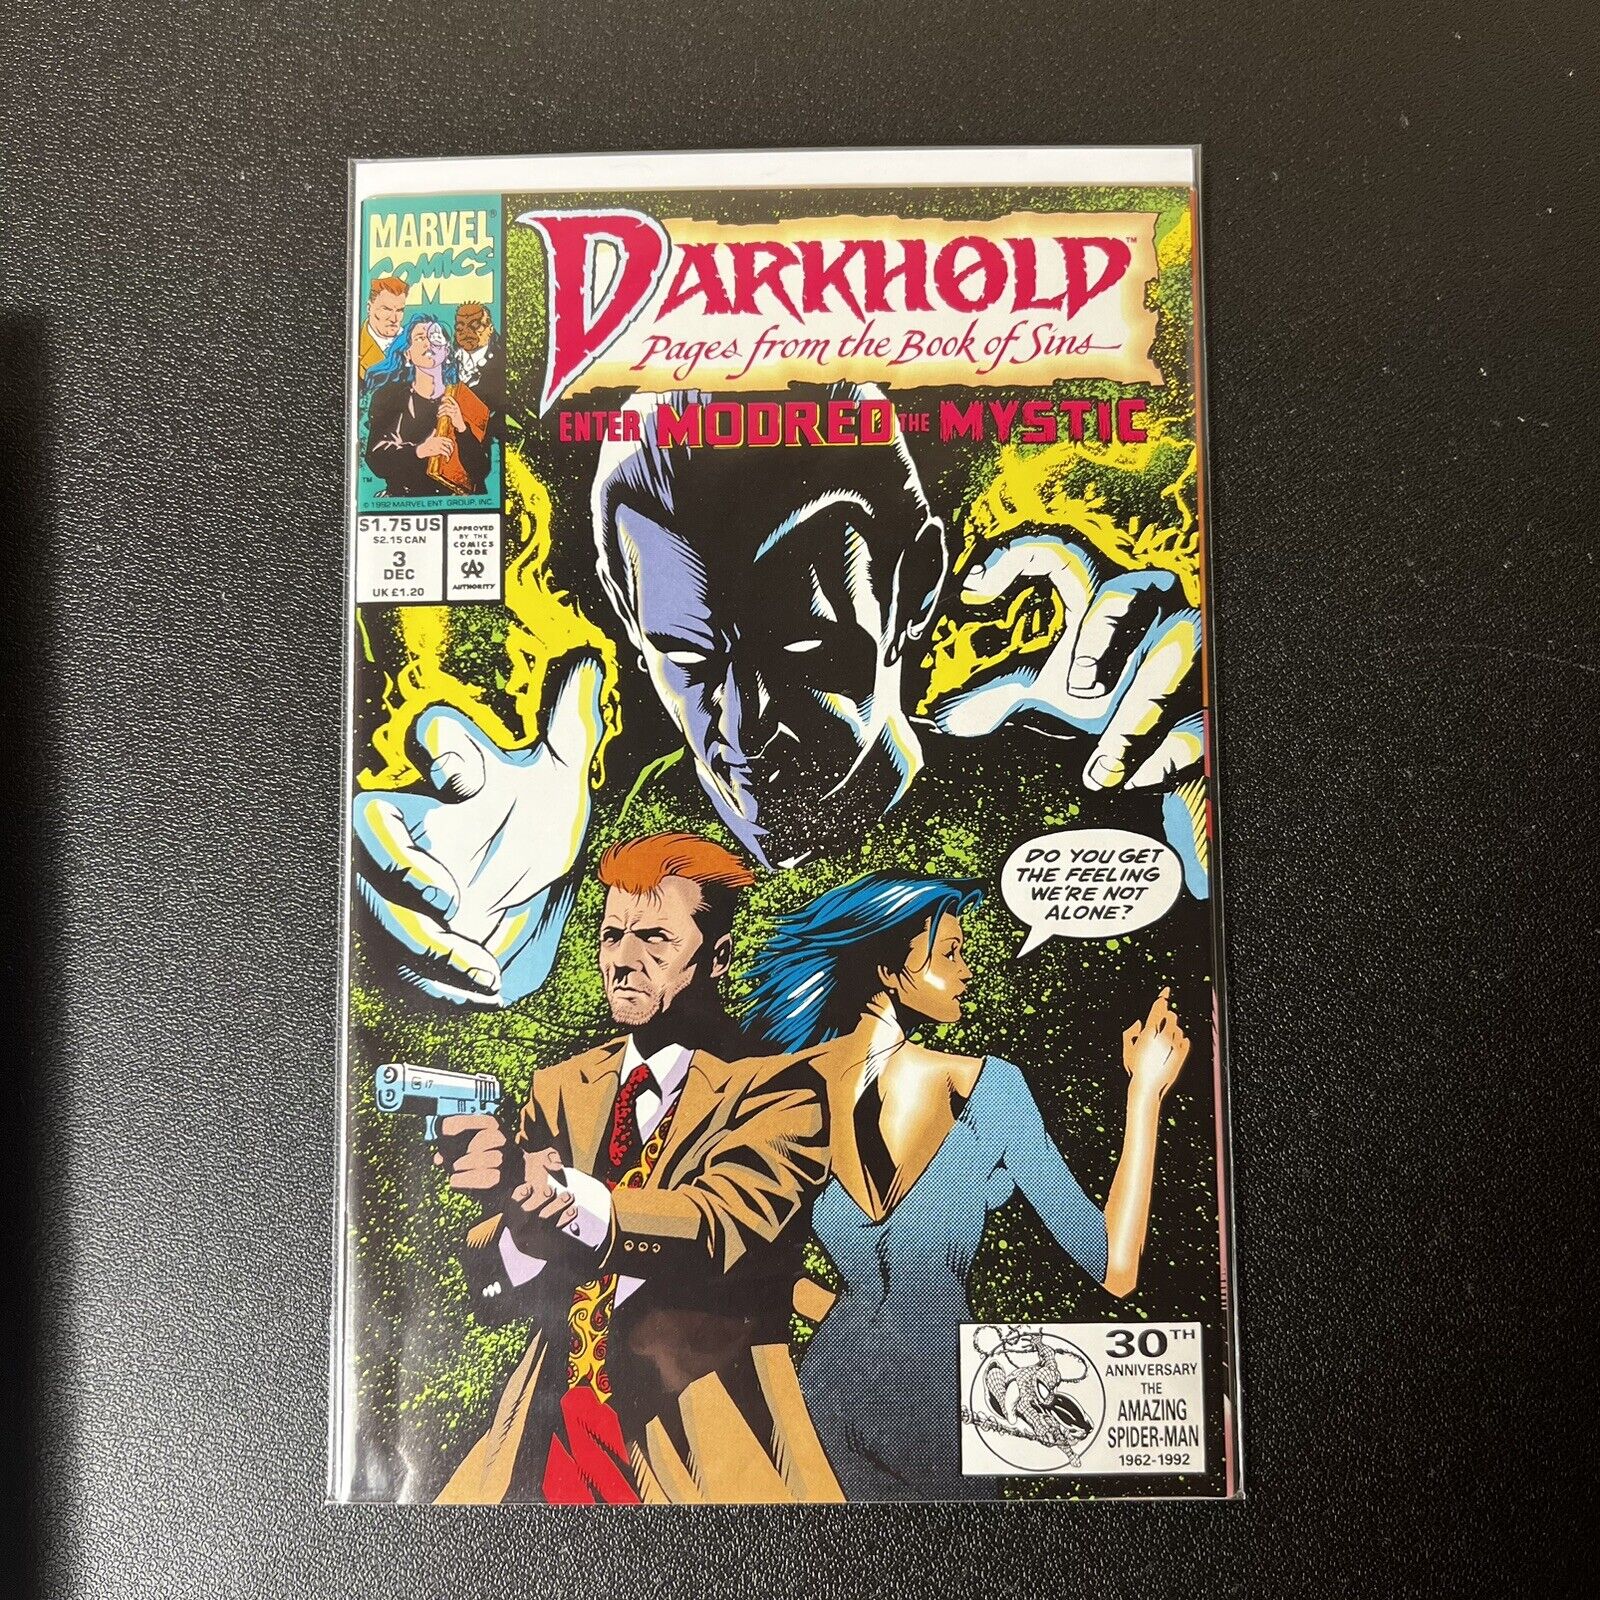 Darkhold: Pages from the Book of Sins #3 Marvel Comics